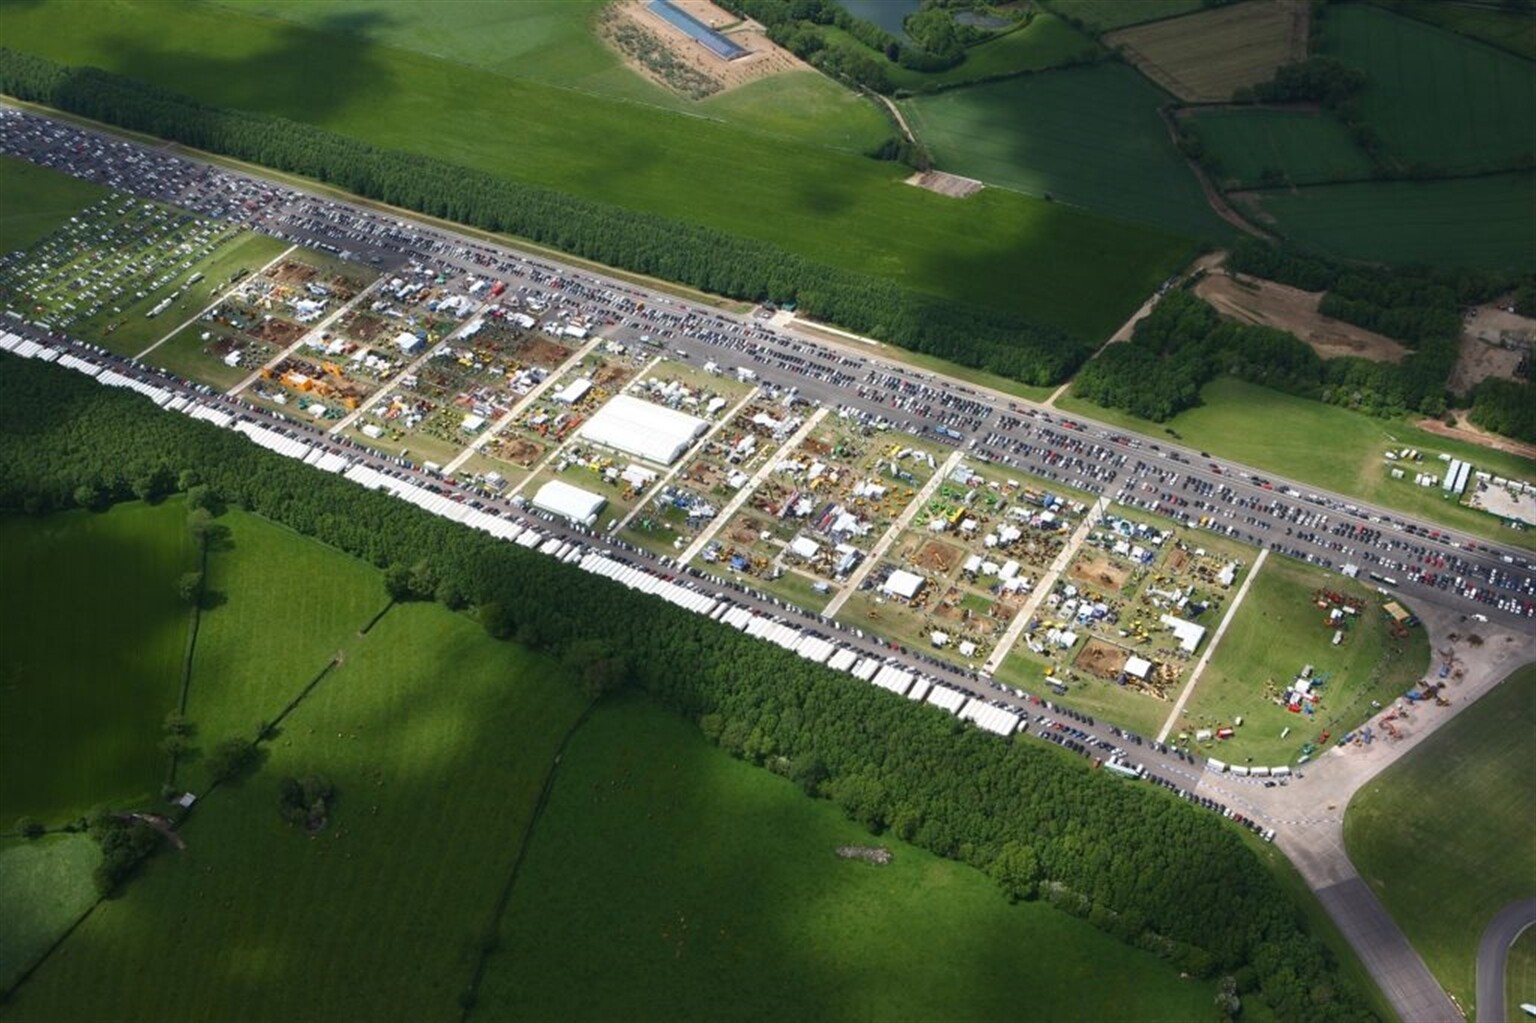 Plantworx Heads East to New Venue in 2019